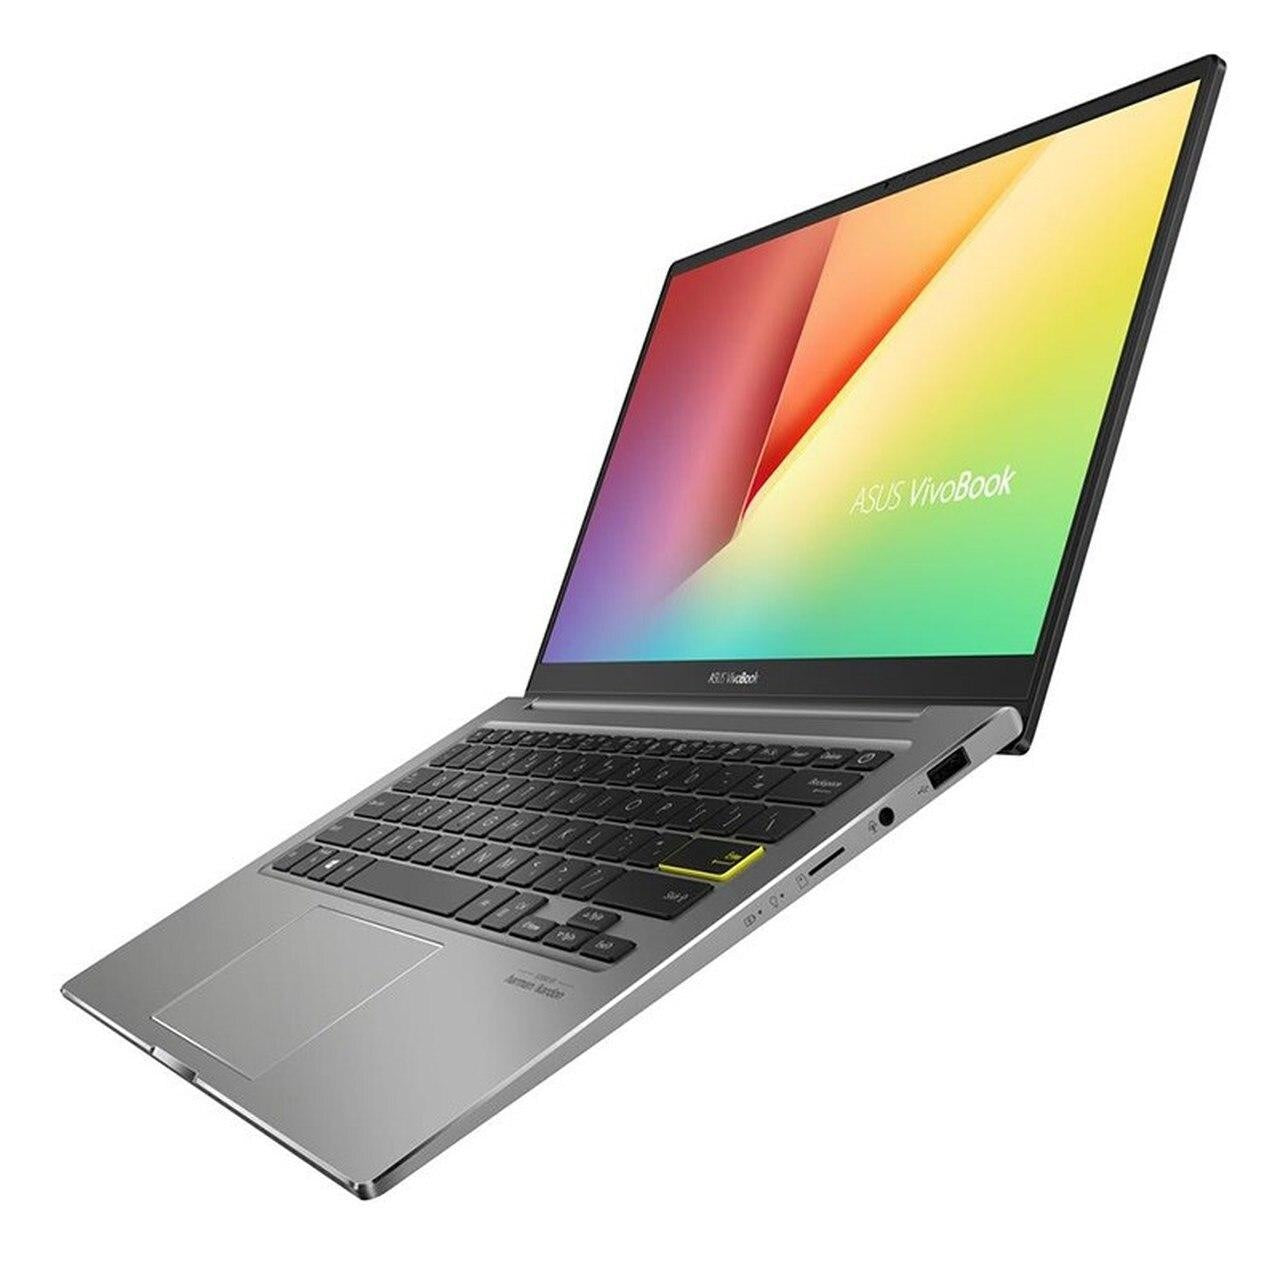 Asus VivoBook S13 13.3' FHD Â i5-1035G1 8GB 512GB SSD WIN10 PRO MX330 2GB Backlit 3CELL 1.2kg 1YR WTY W10P Notebook (Indie Black) (S333JP-EG009R) ASUS